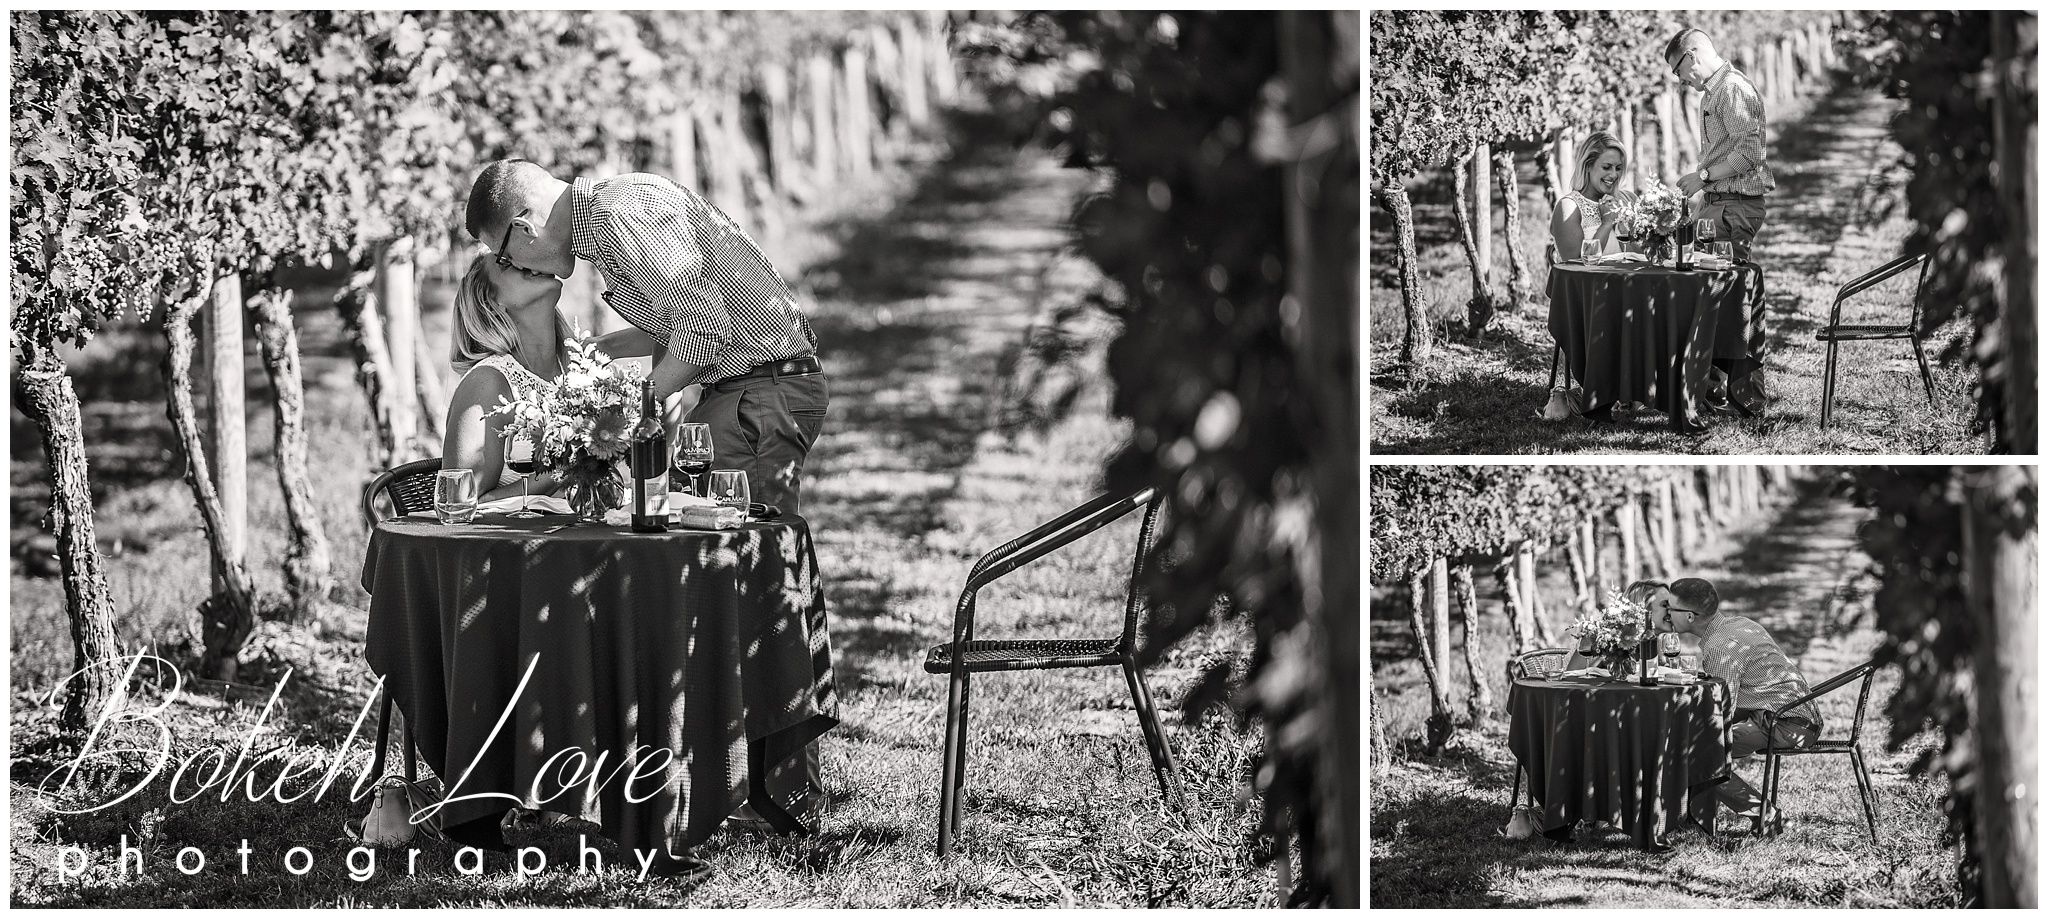 Cape May Winery Proposal, Bokeh Love Photography, Cape May Wedding Photographer